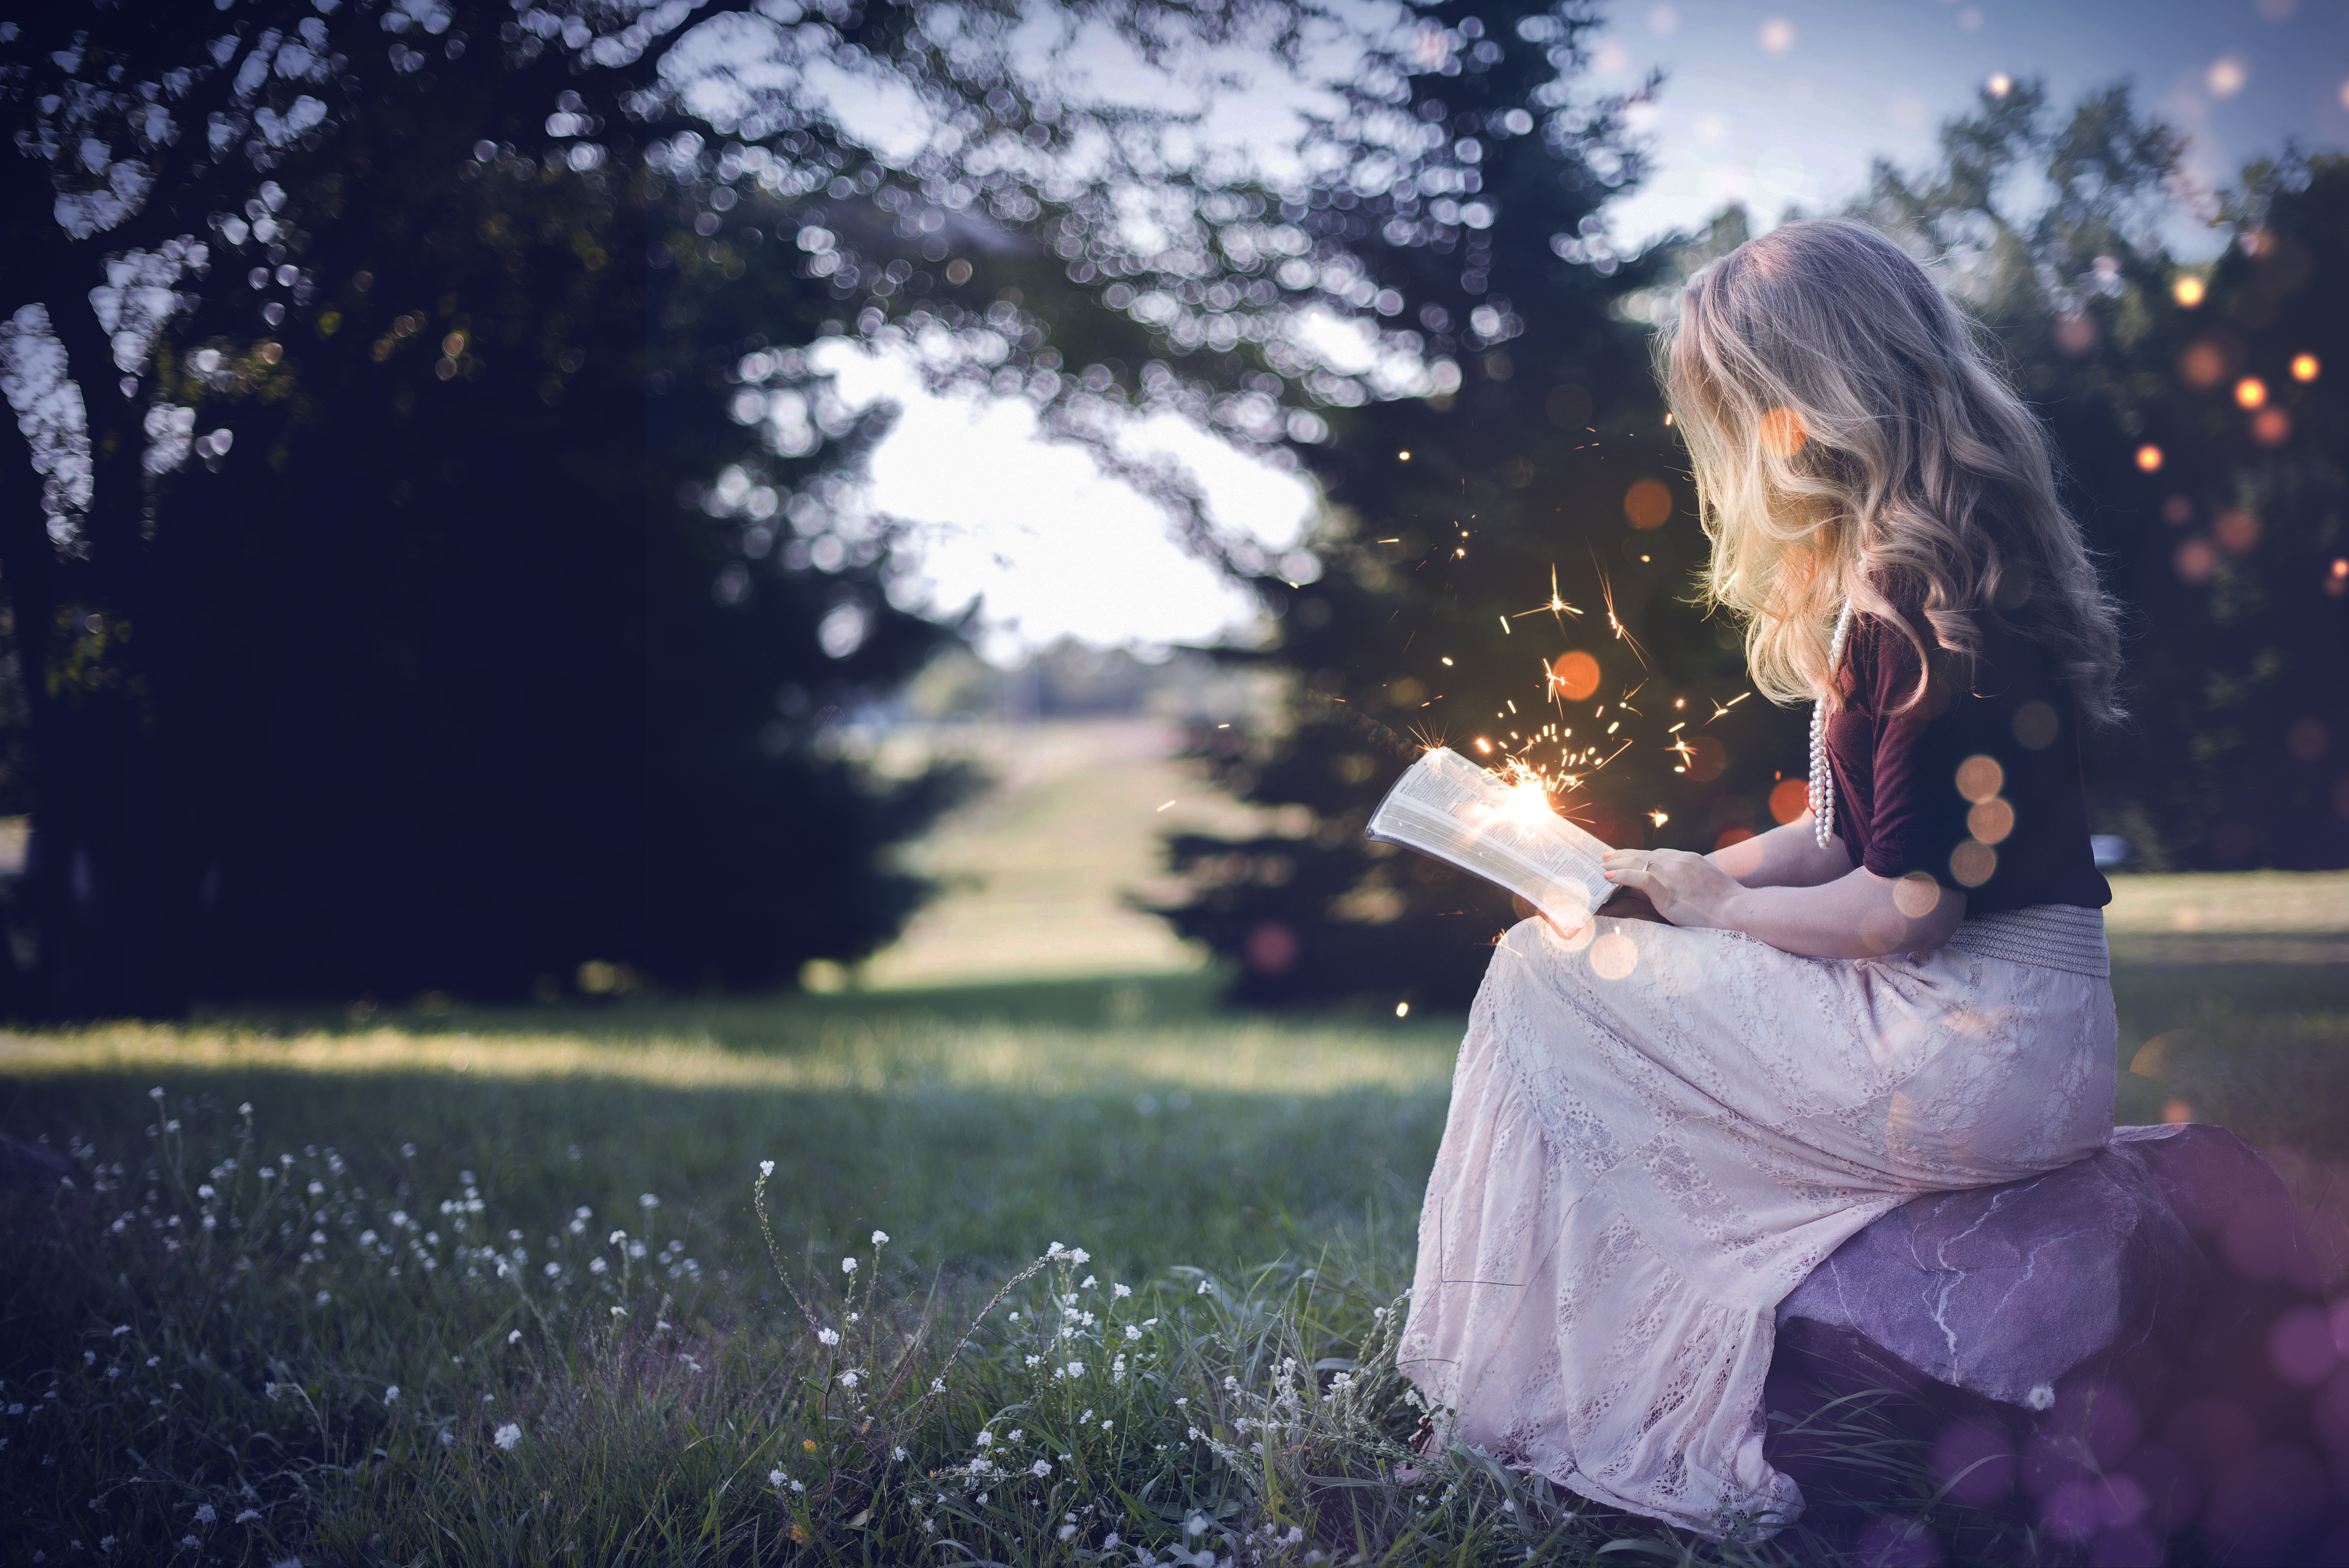 HD desktop wallpaper: Miscellanea, Blur, Smooth, Mood, Miscellaneous,  Hands, Reading, Girl, Books download free picture #138450